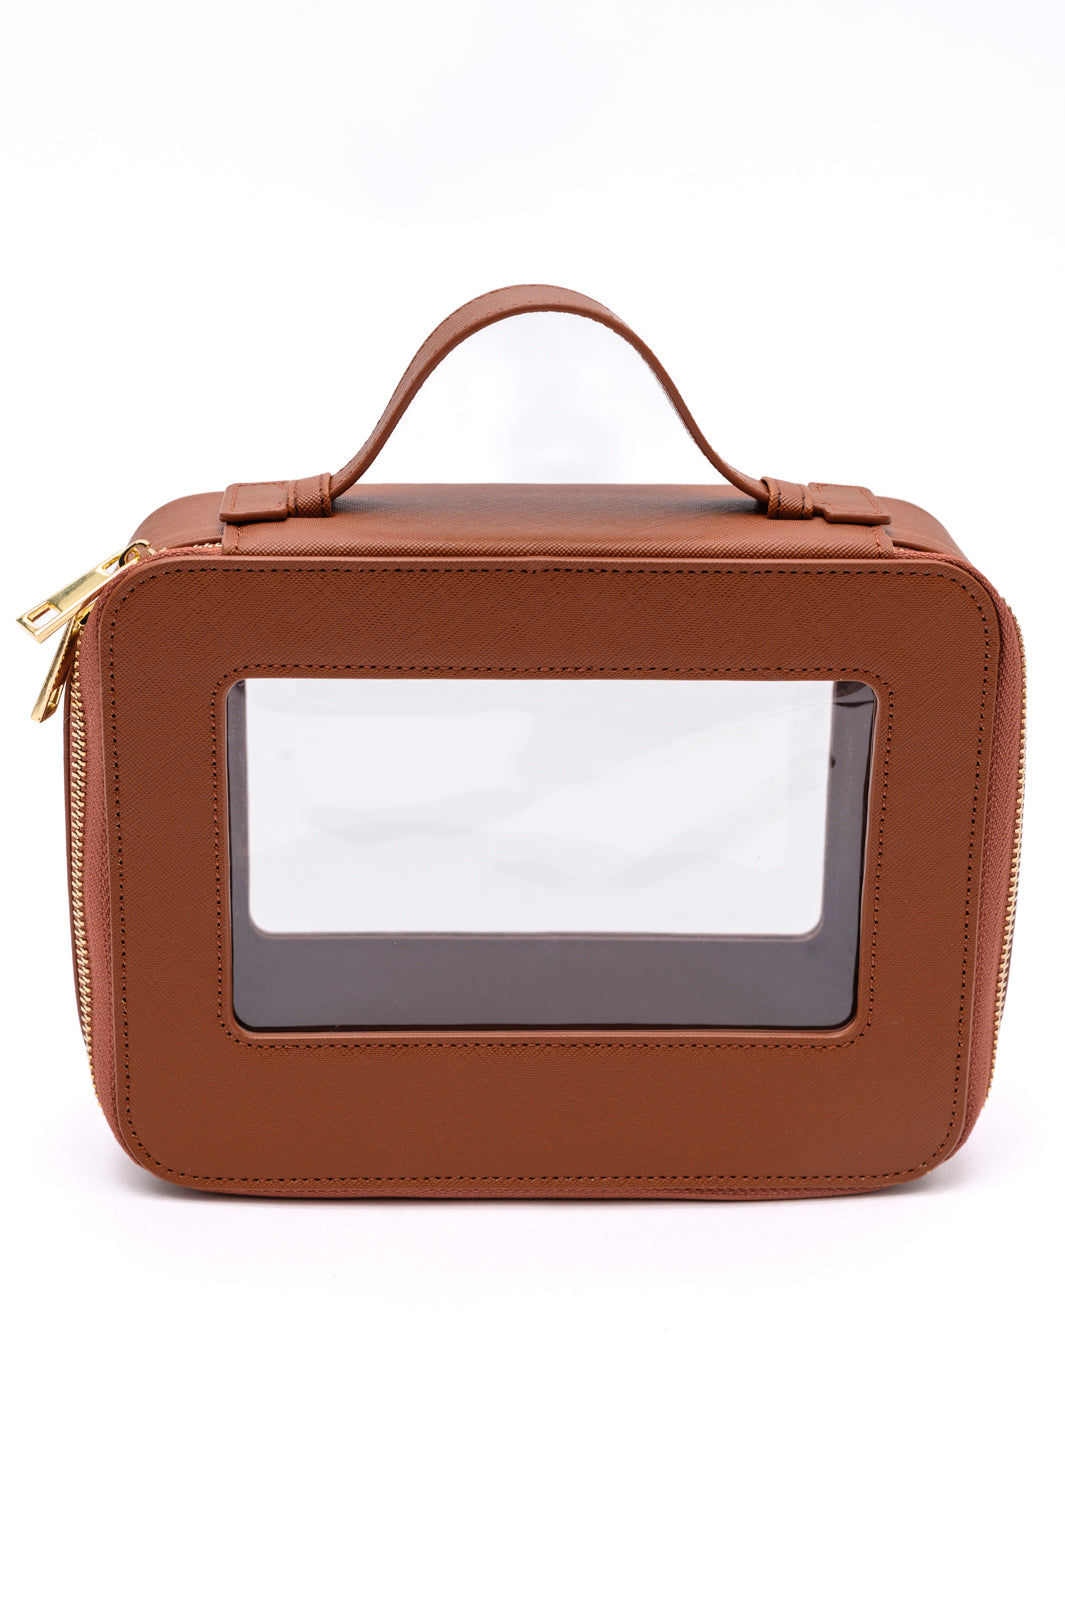 PU Leather Travel Cosmetic Case in Camel (Online Exclusive)